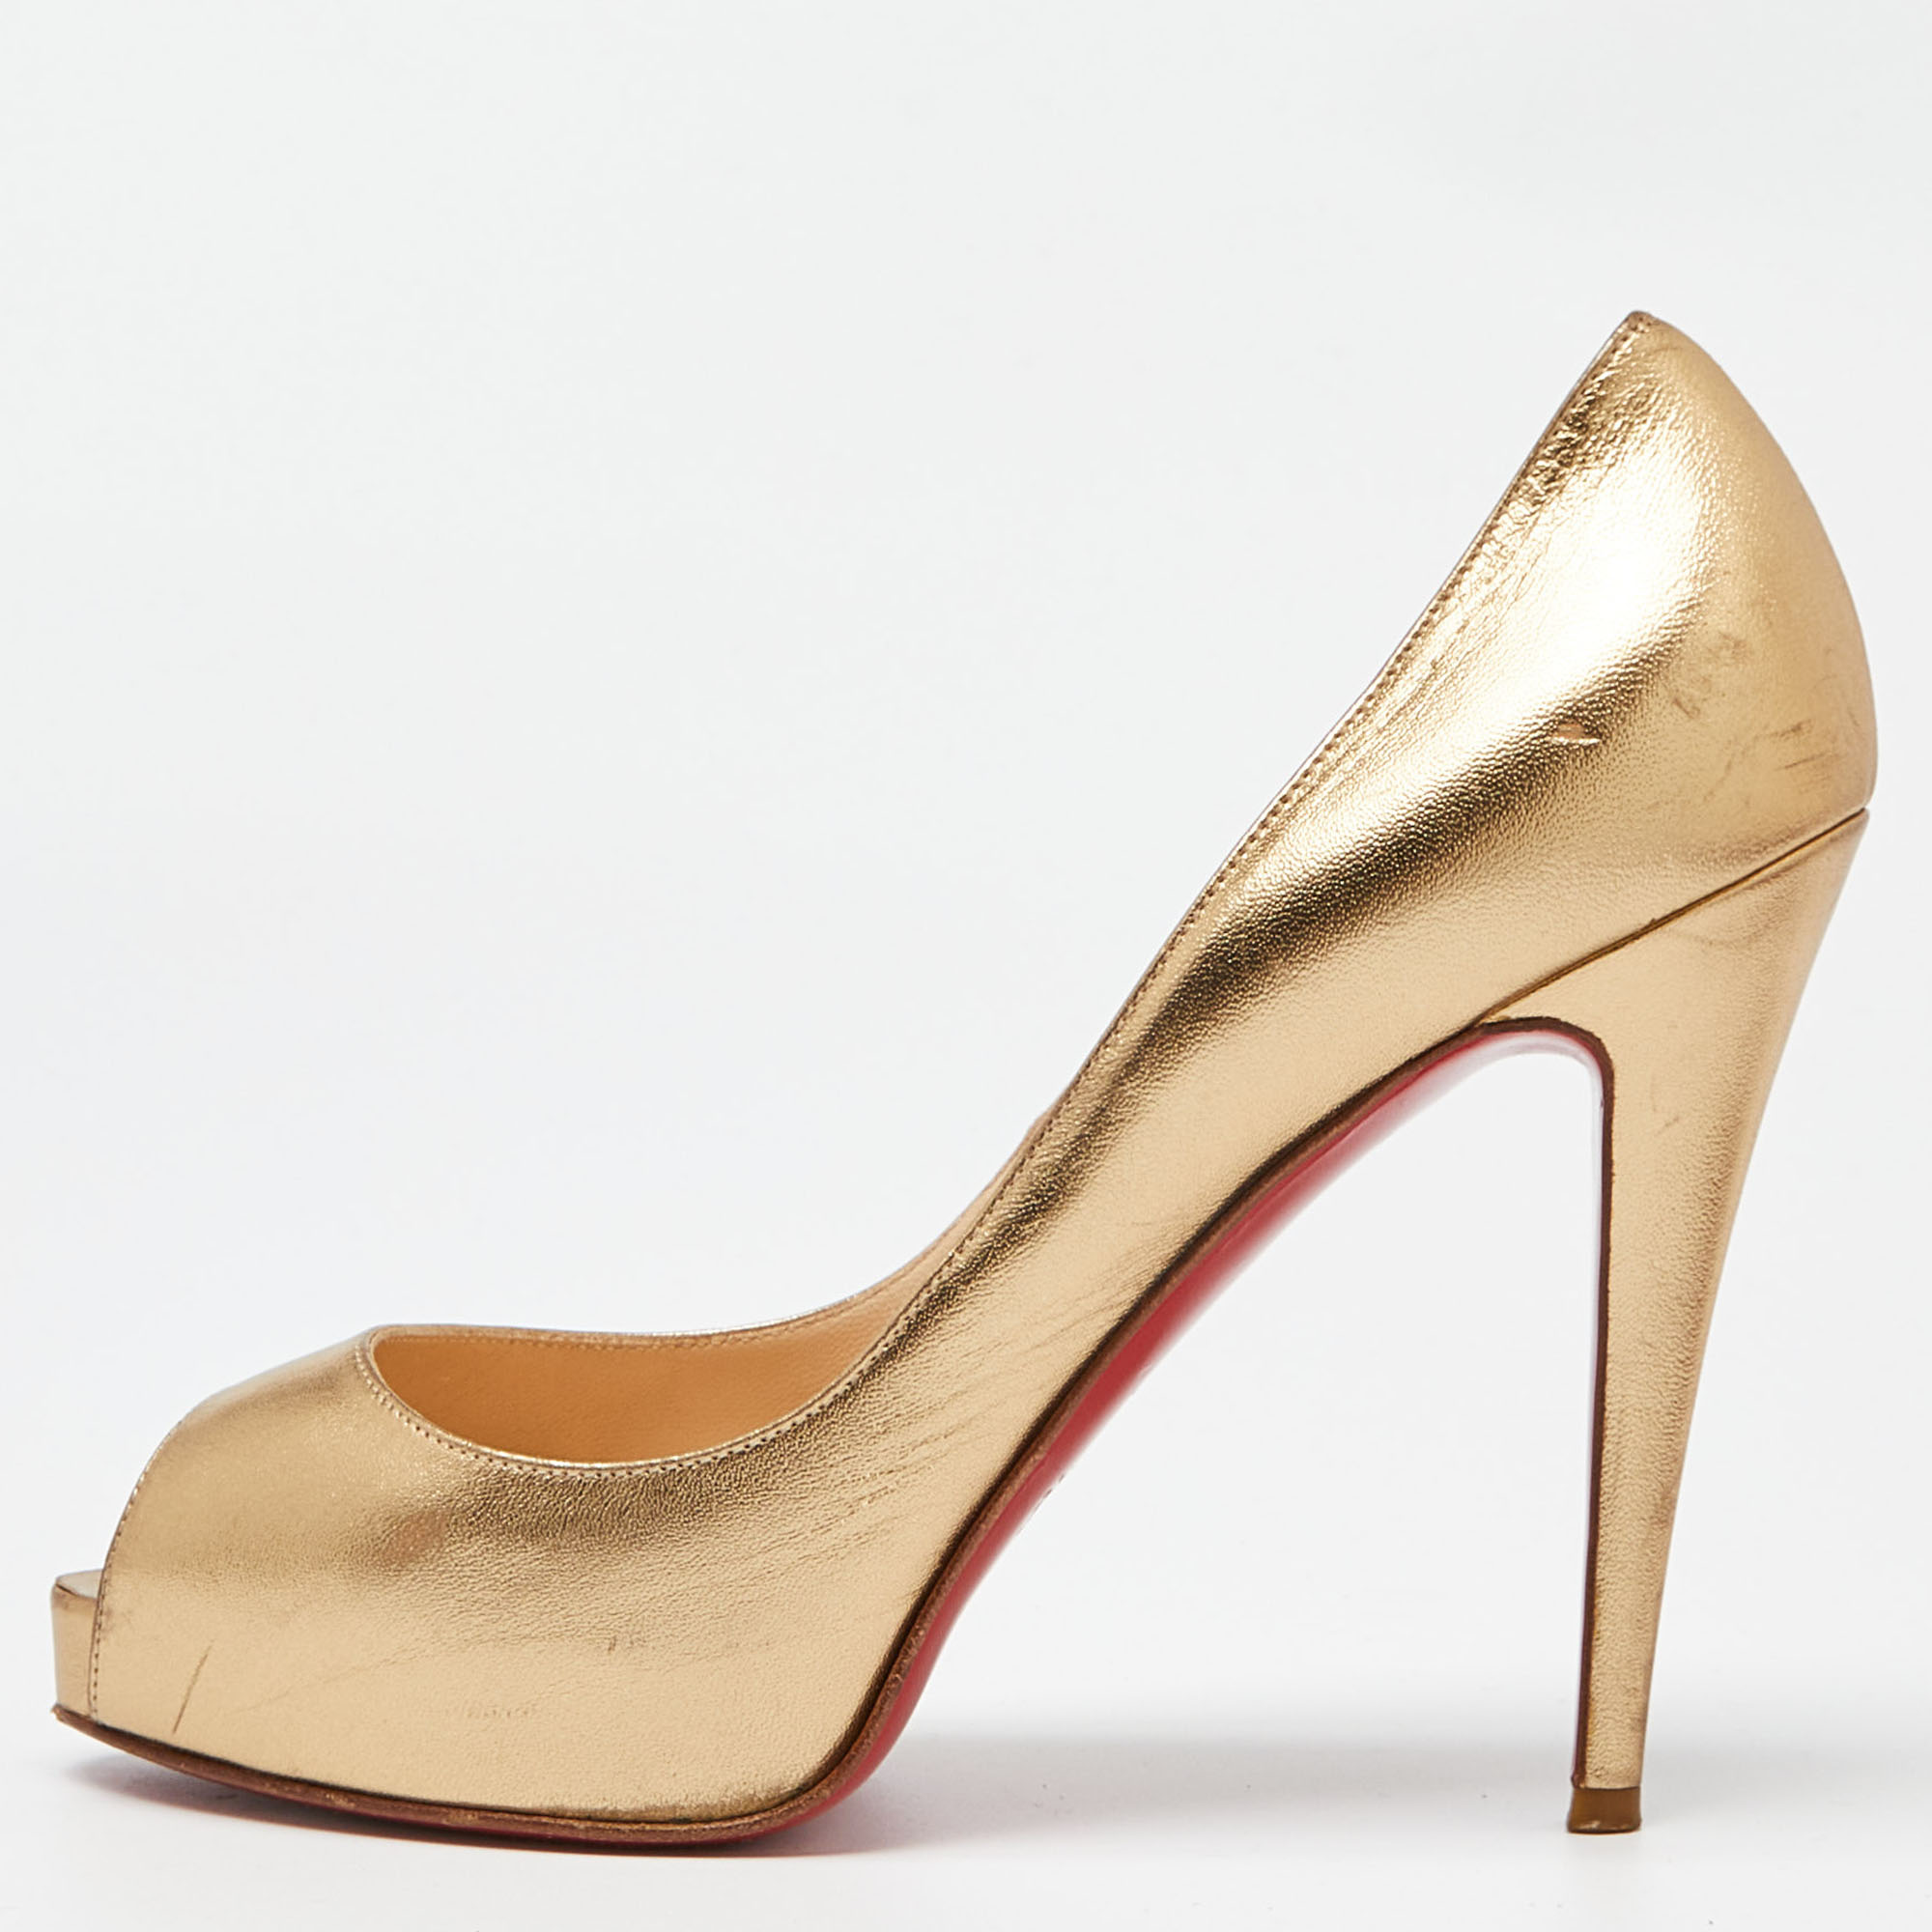 Christian louboutin metallic gold leather very prive pumps size 39